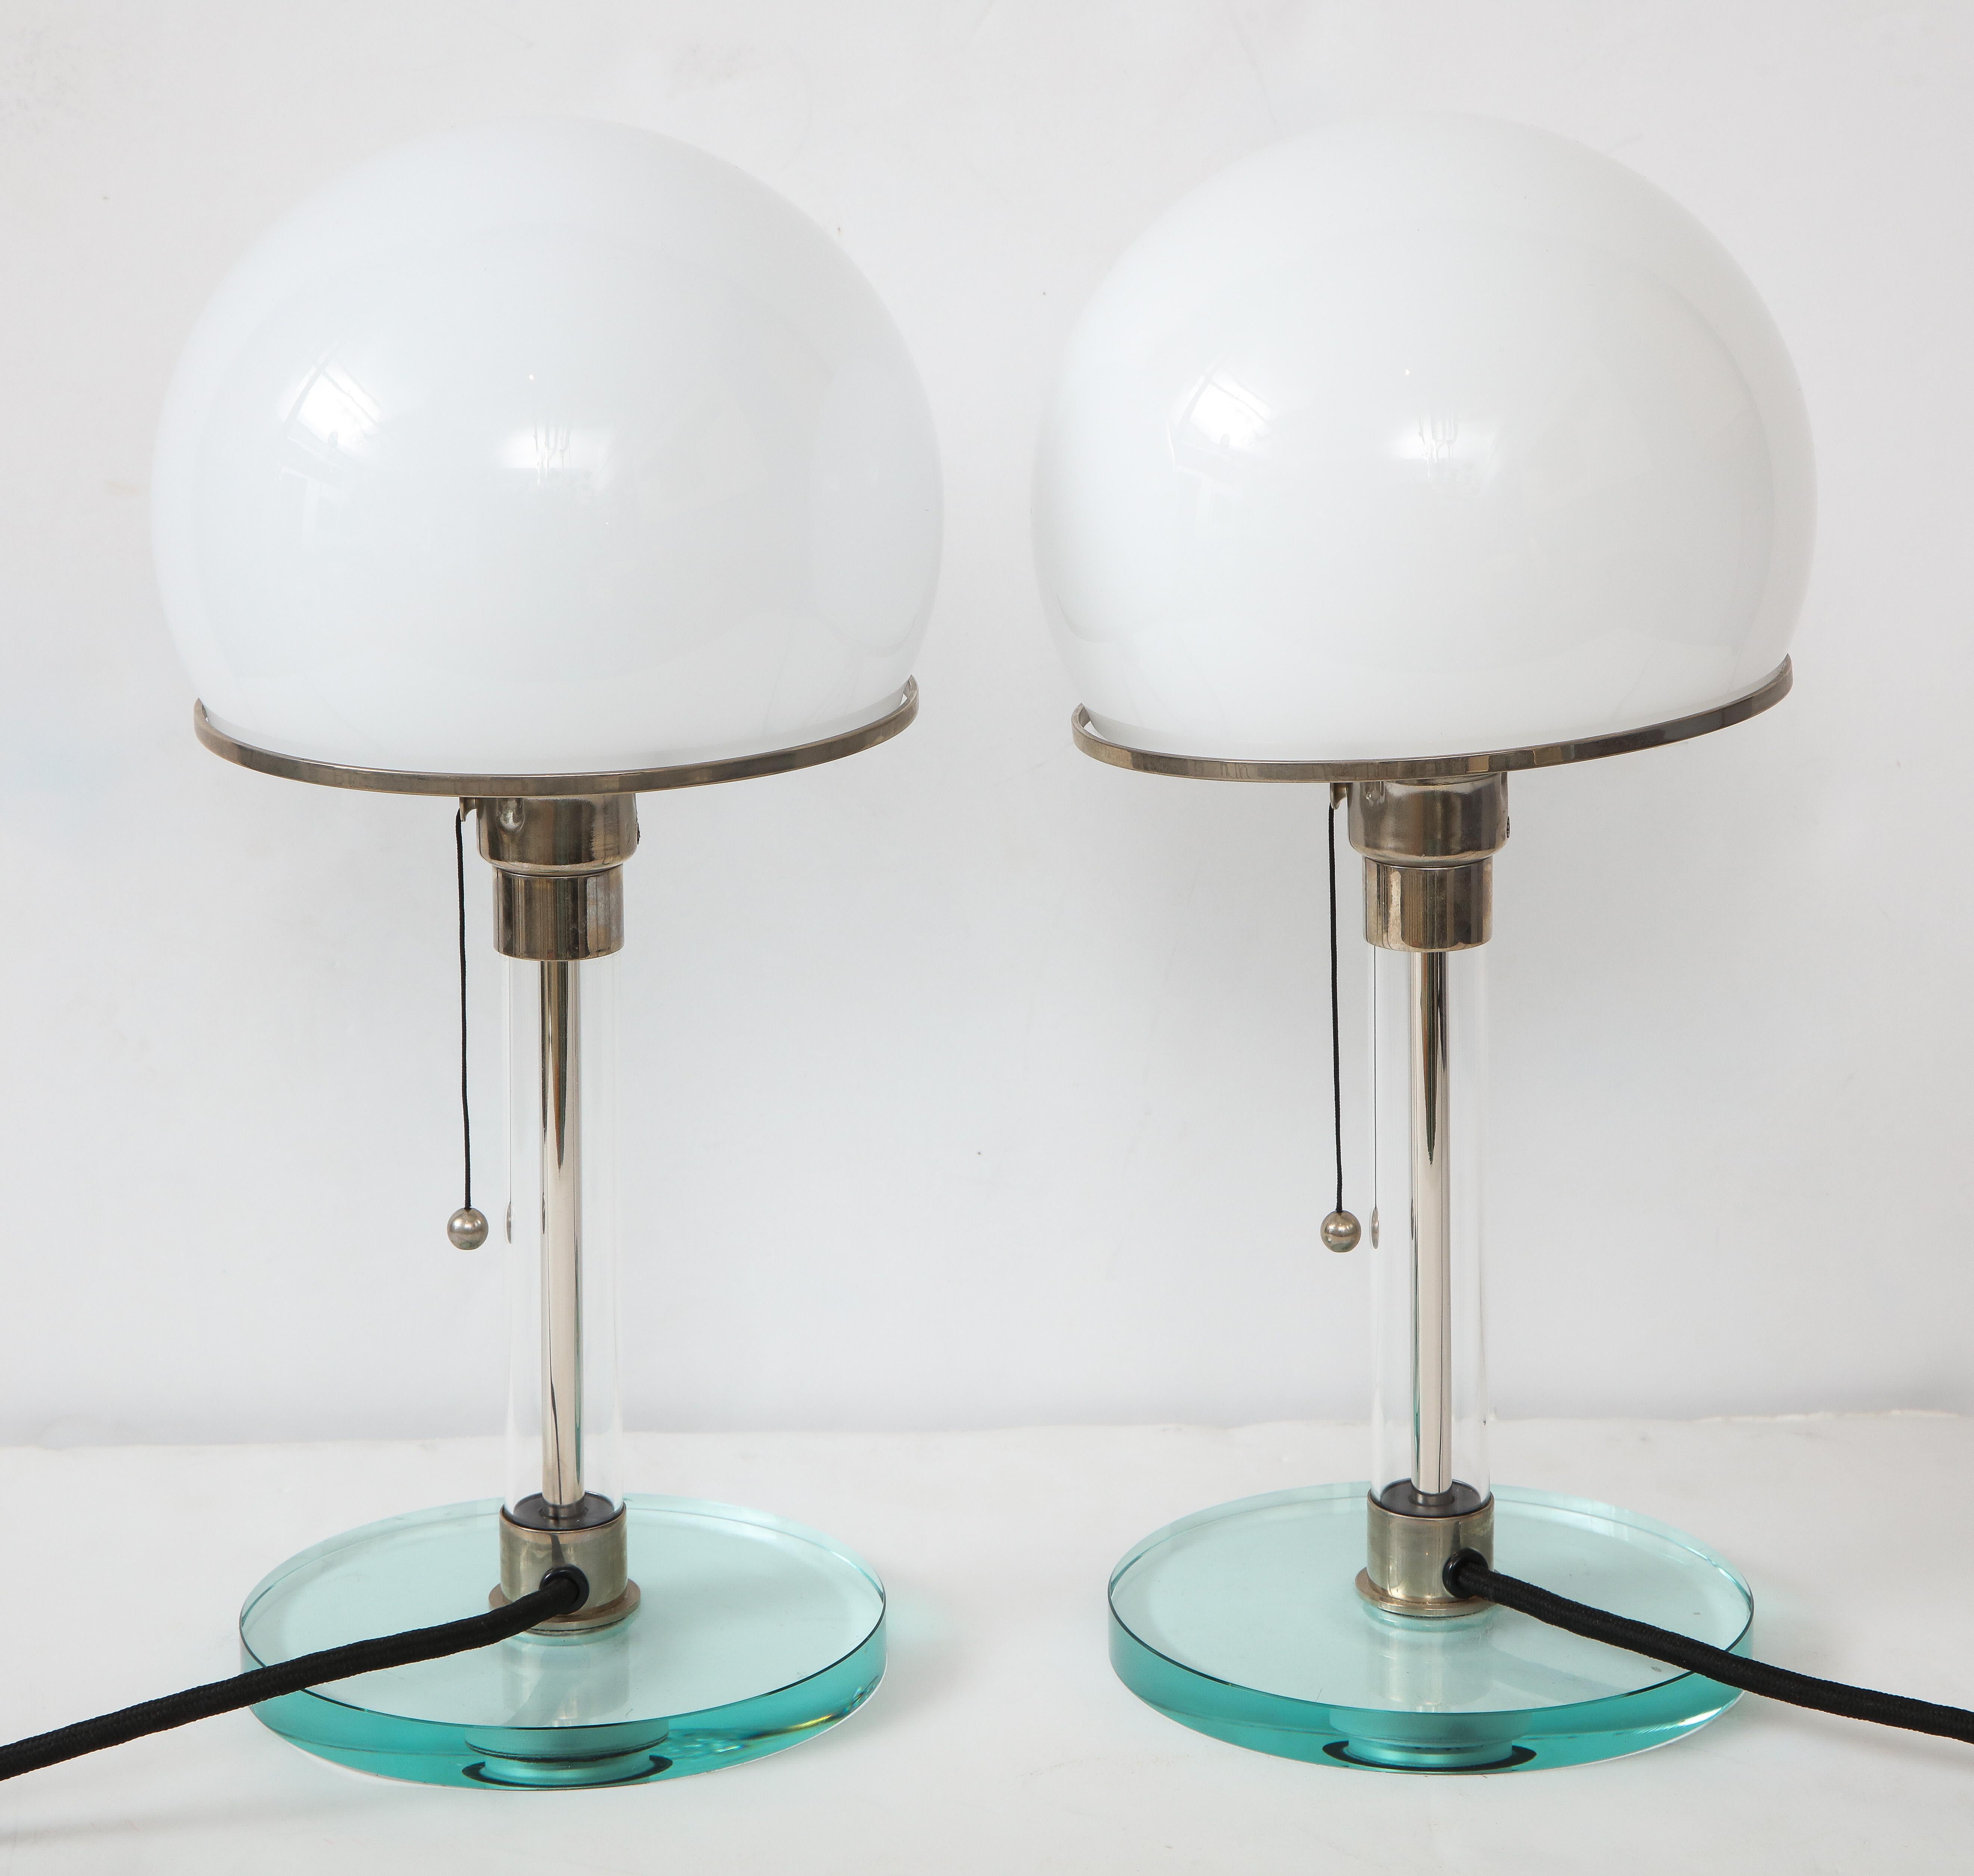 Pair of Table Lamps after the Design by Wilhelm Wagenfeld 2